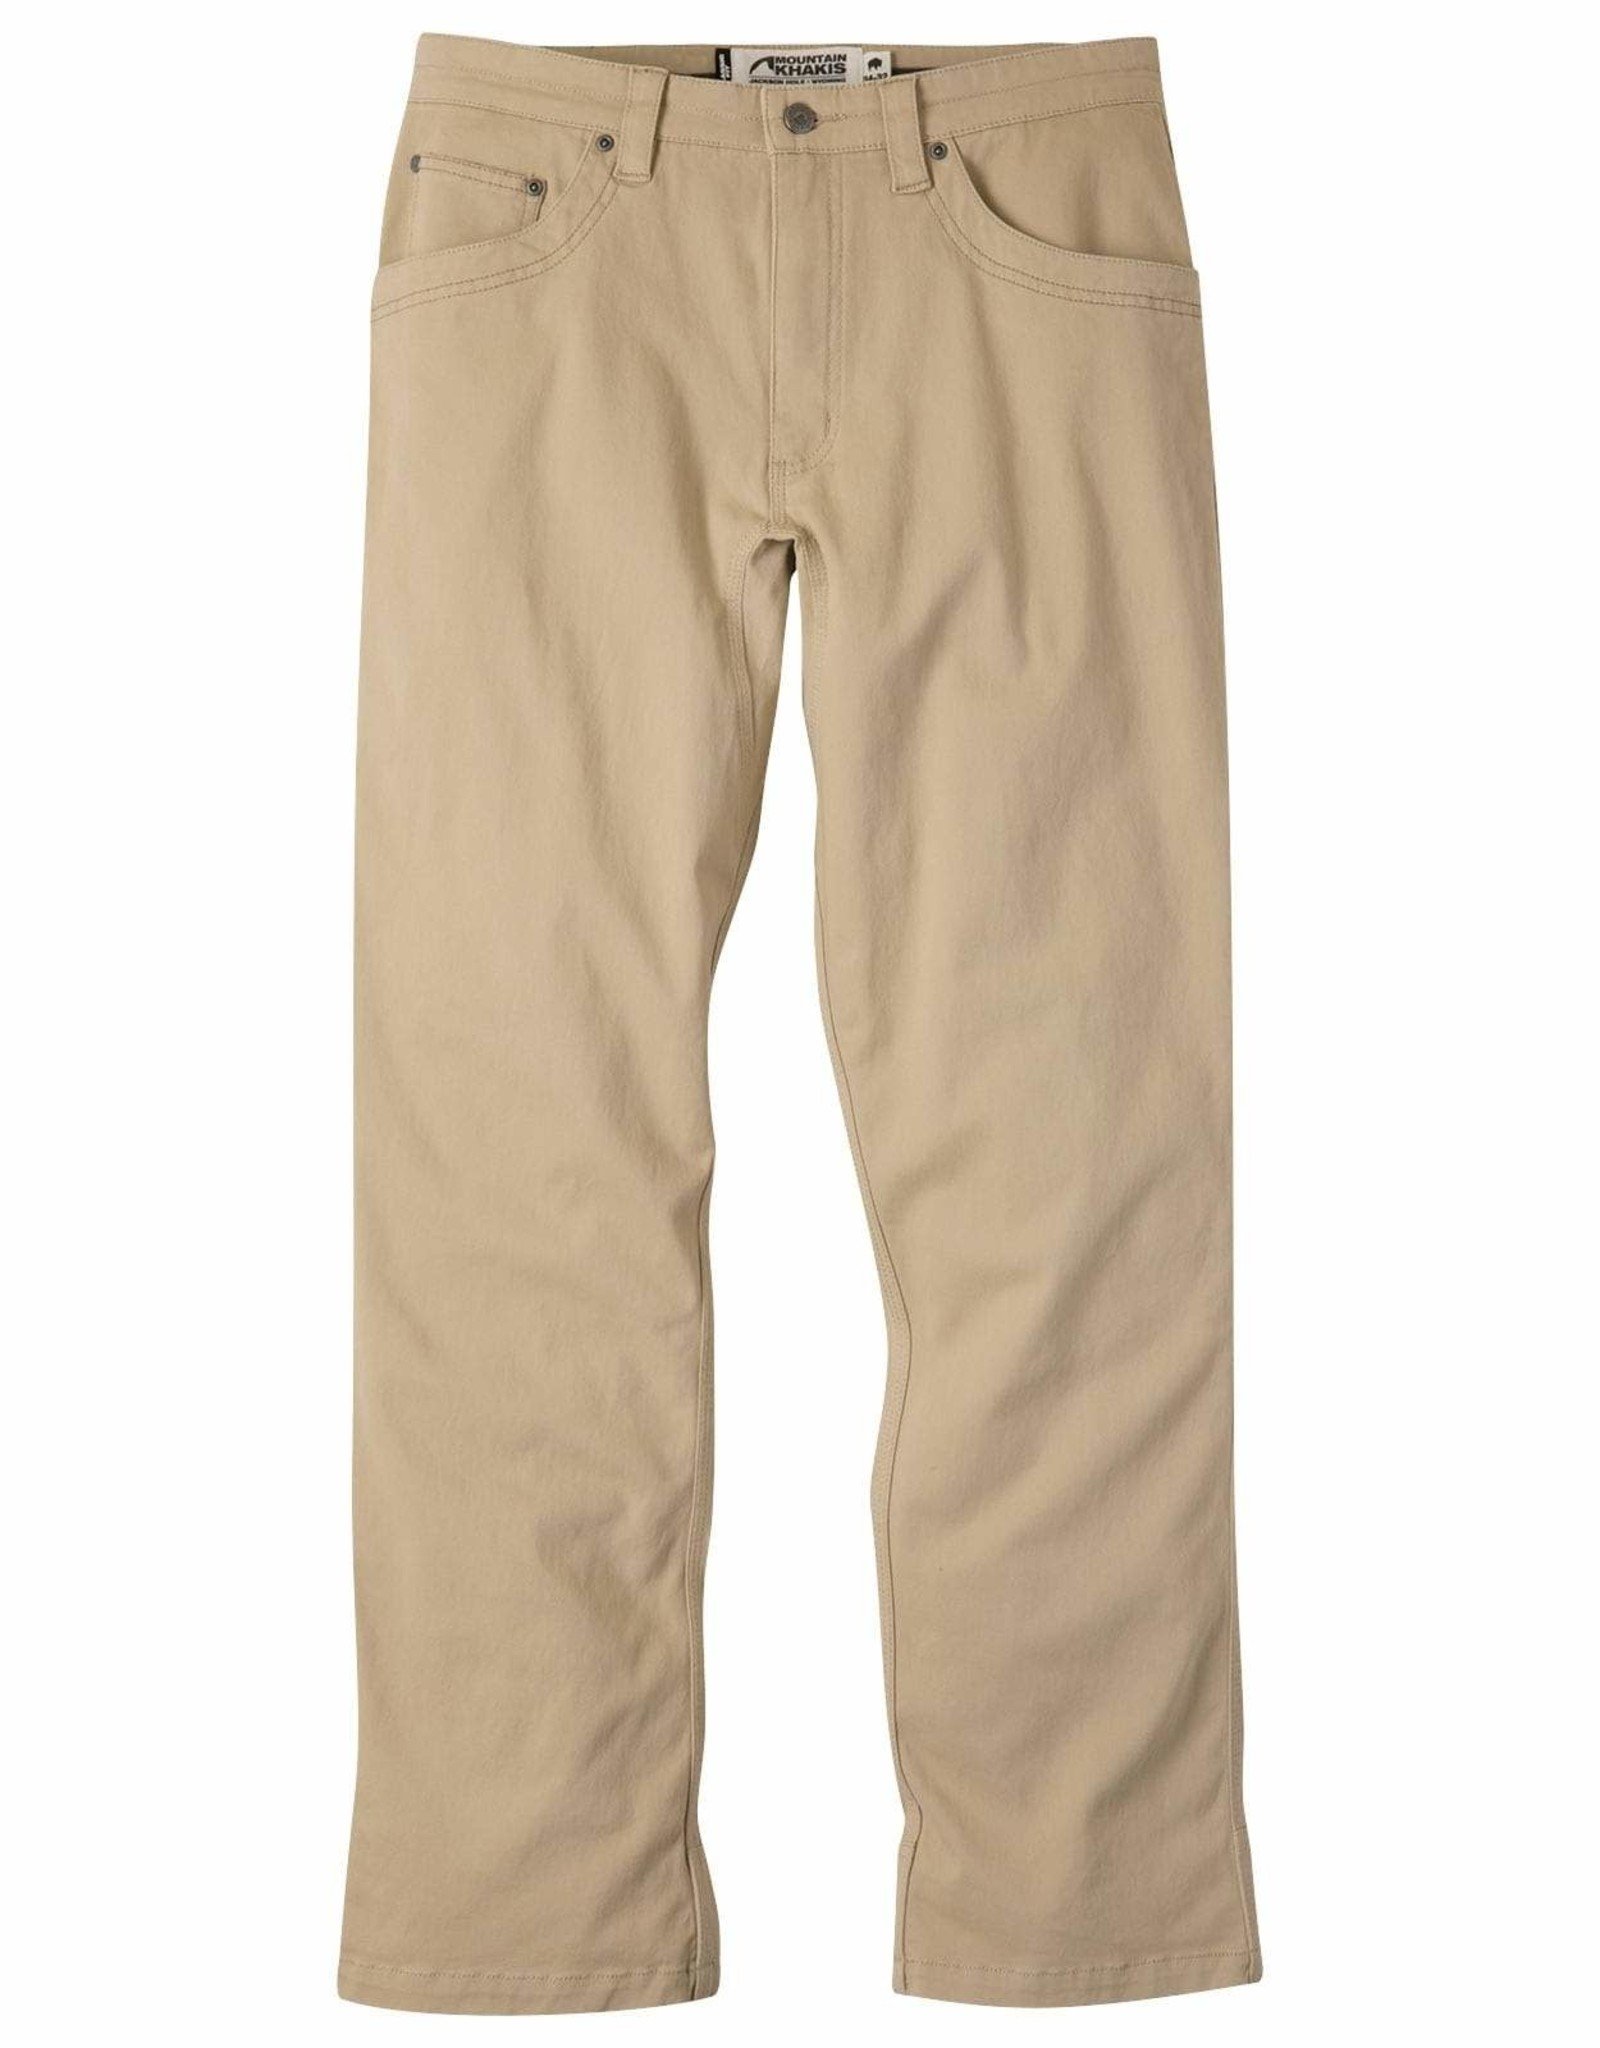 Mountain Khakis Men's Camber 103 Pant - Classic Fit